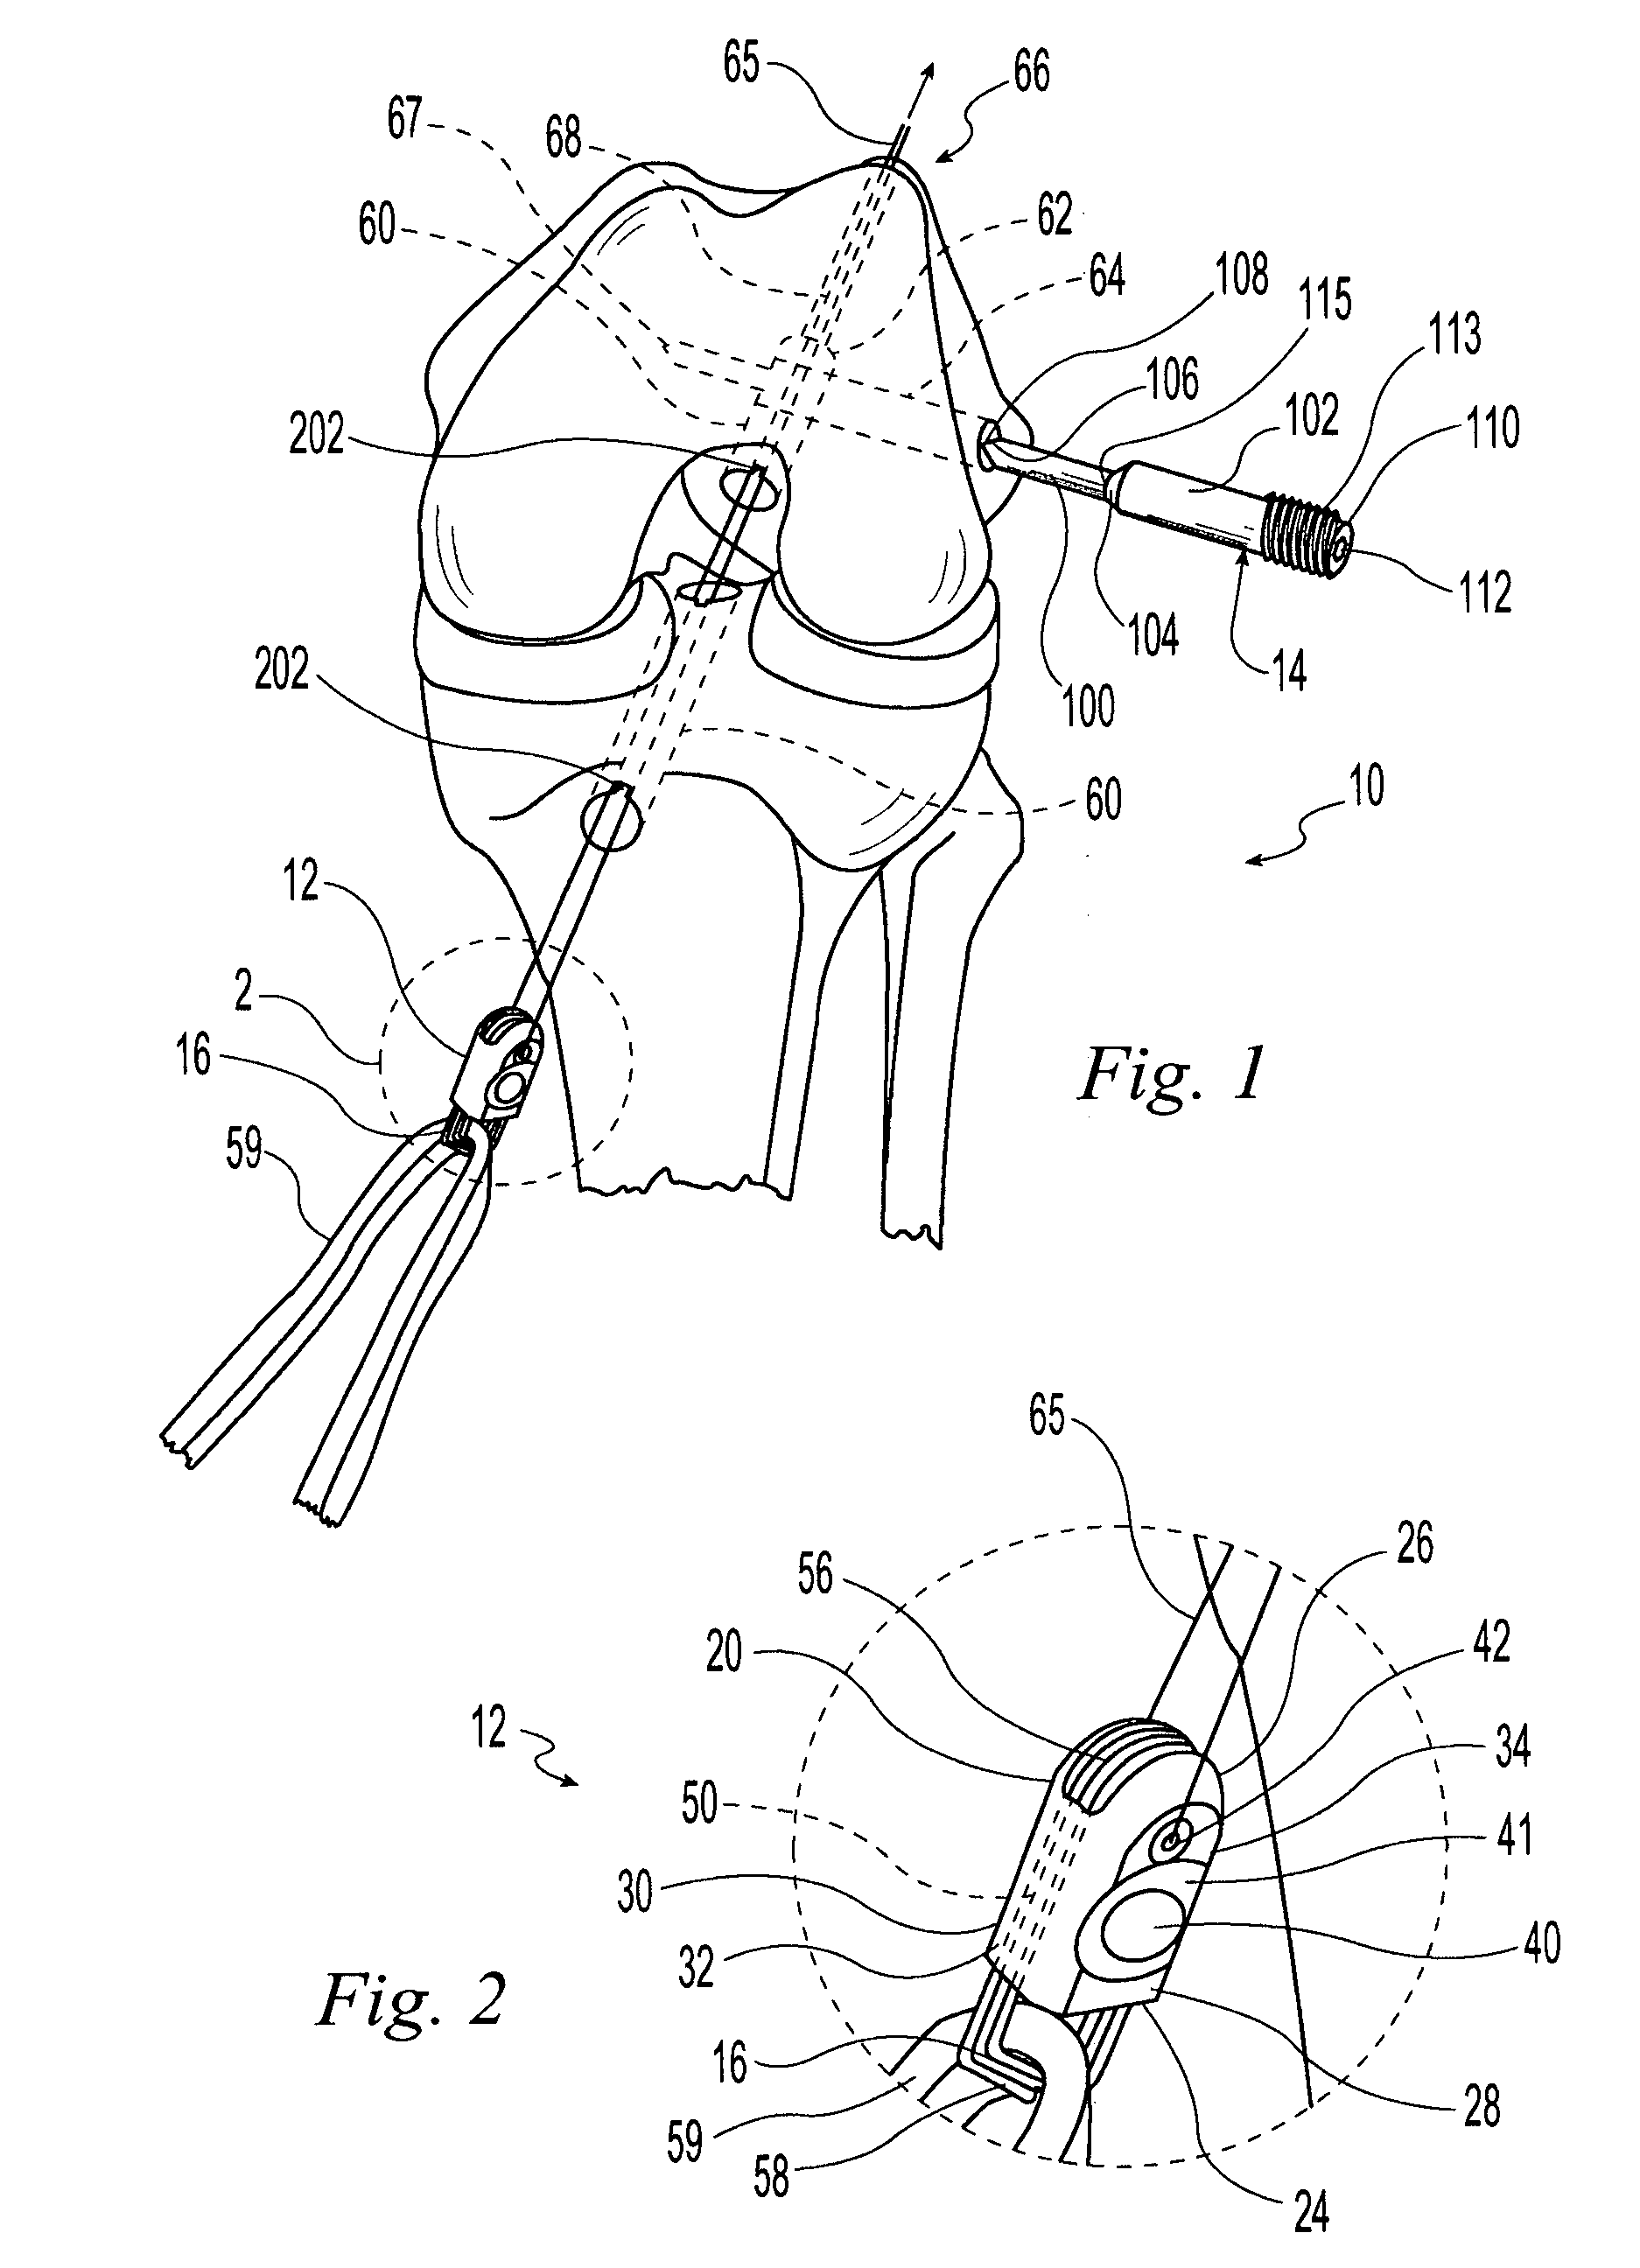 Cross-pin graft fixation, instruments, and methods